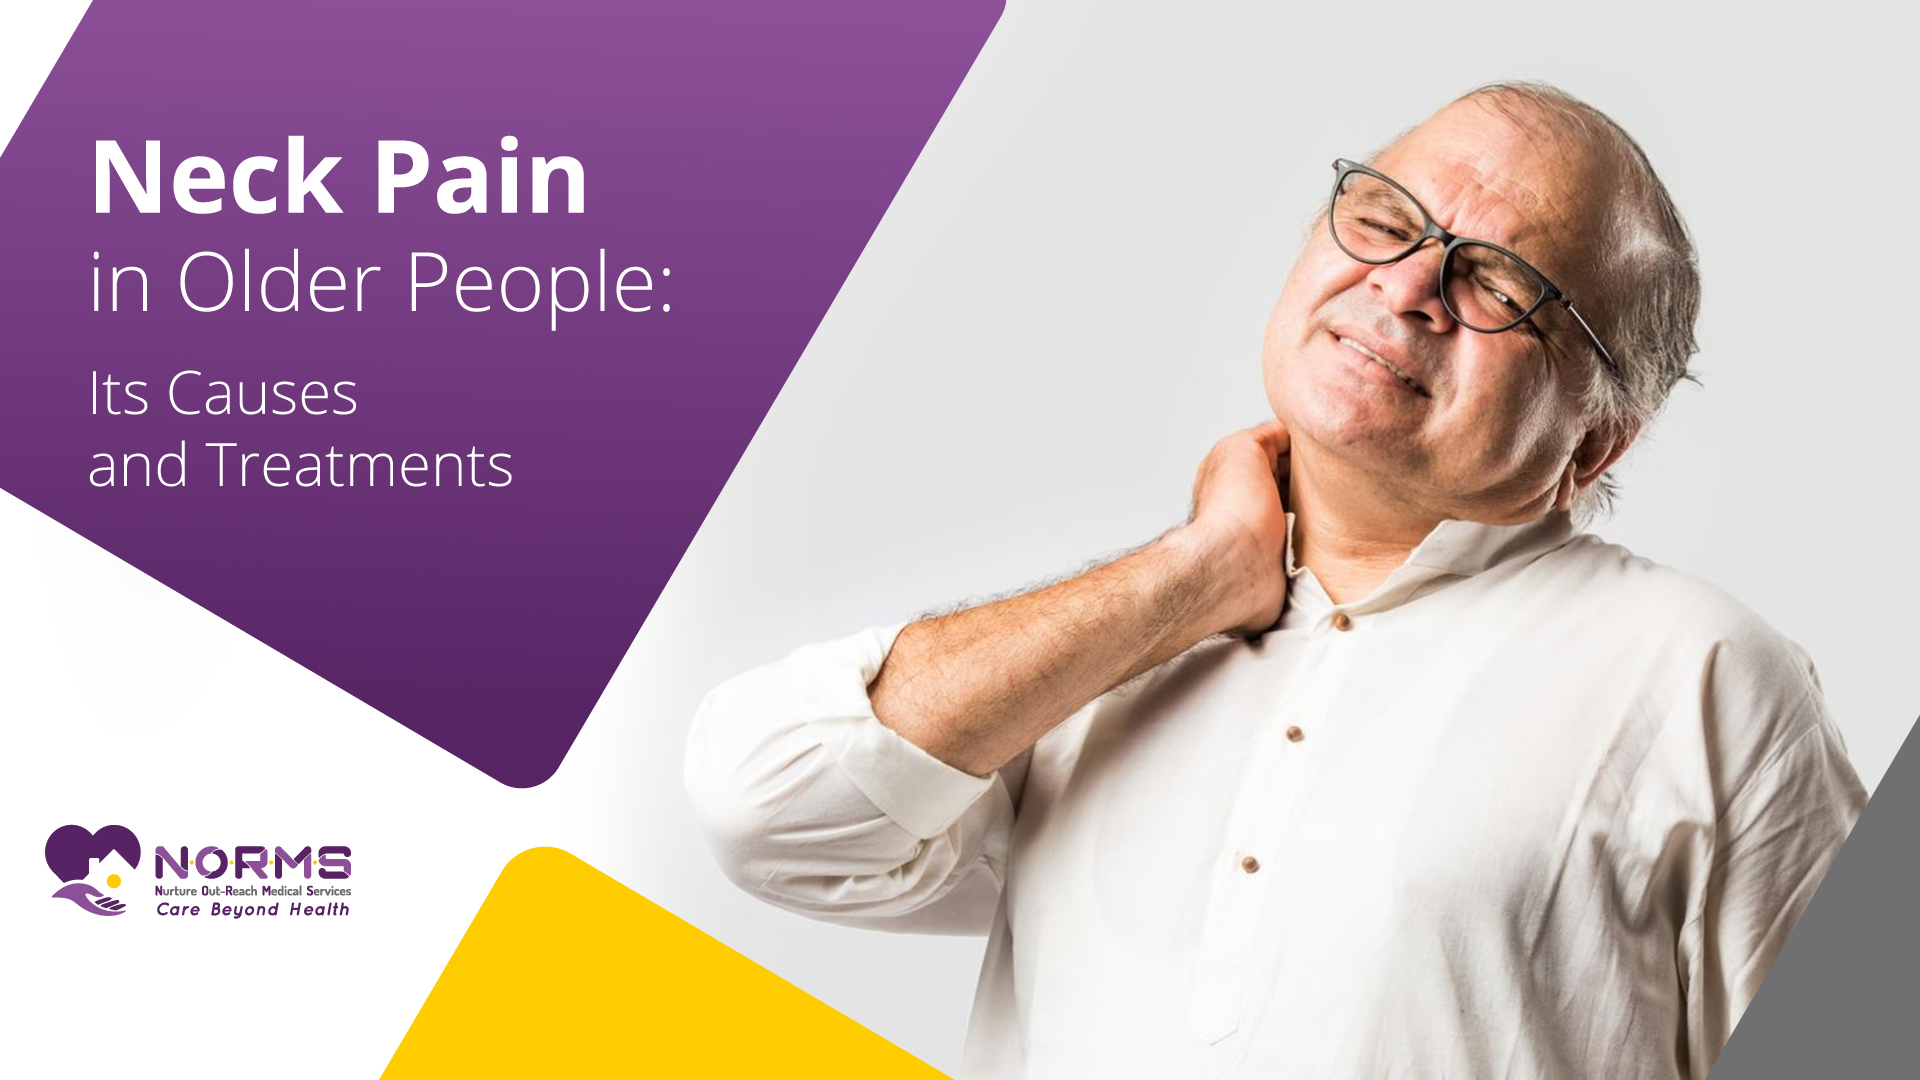 Neck pain in older people: its causes and treatments